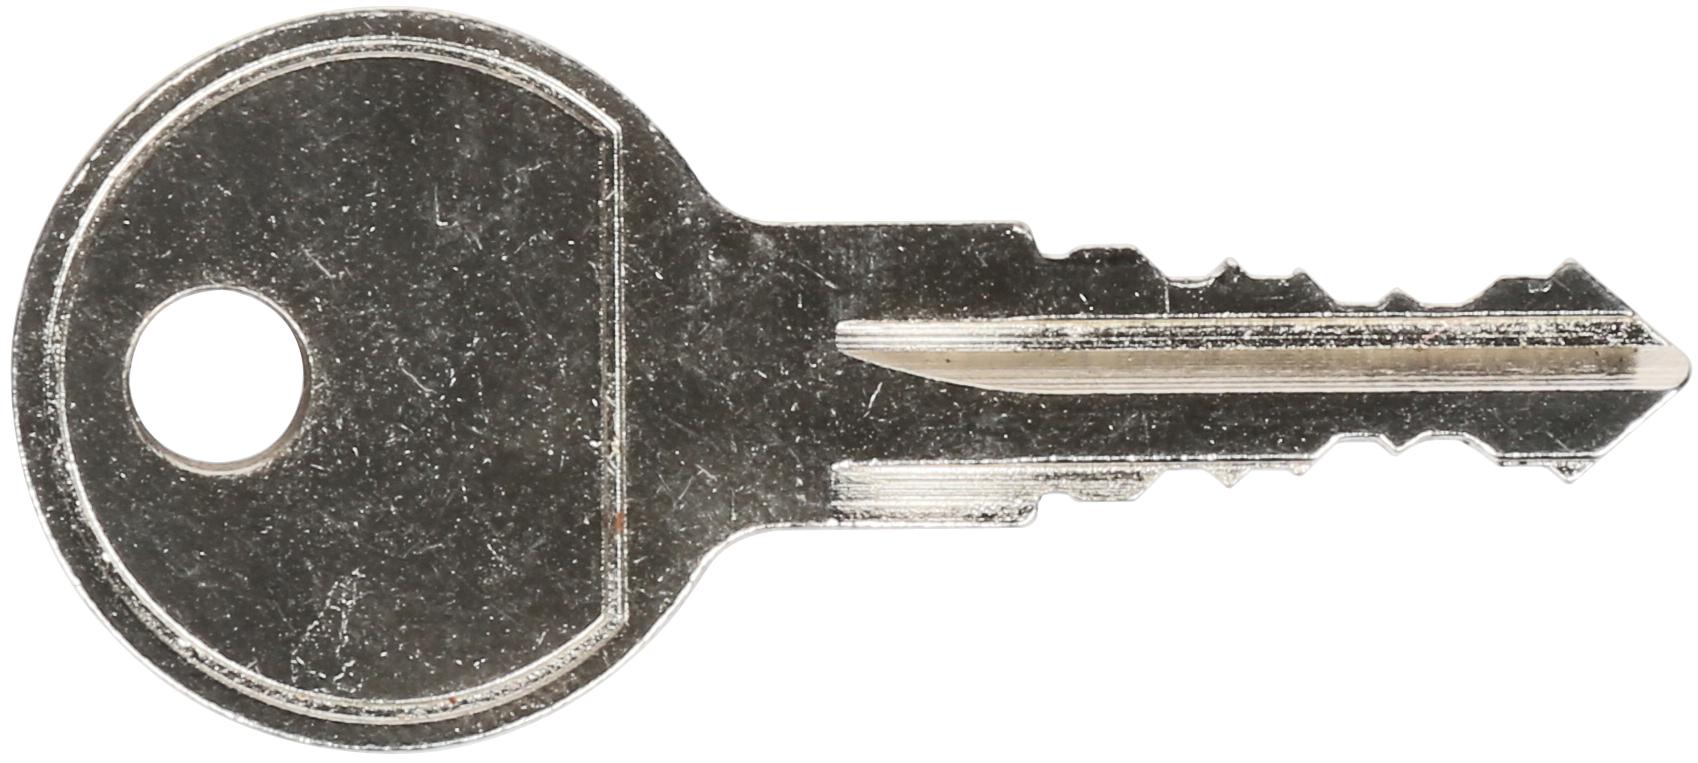 Spare Roof Box Key 187